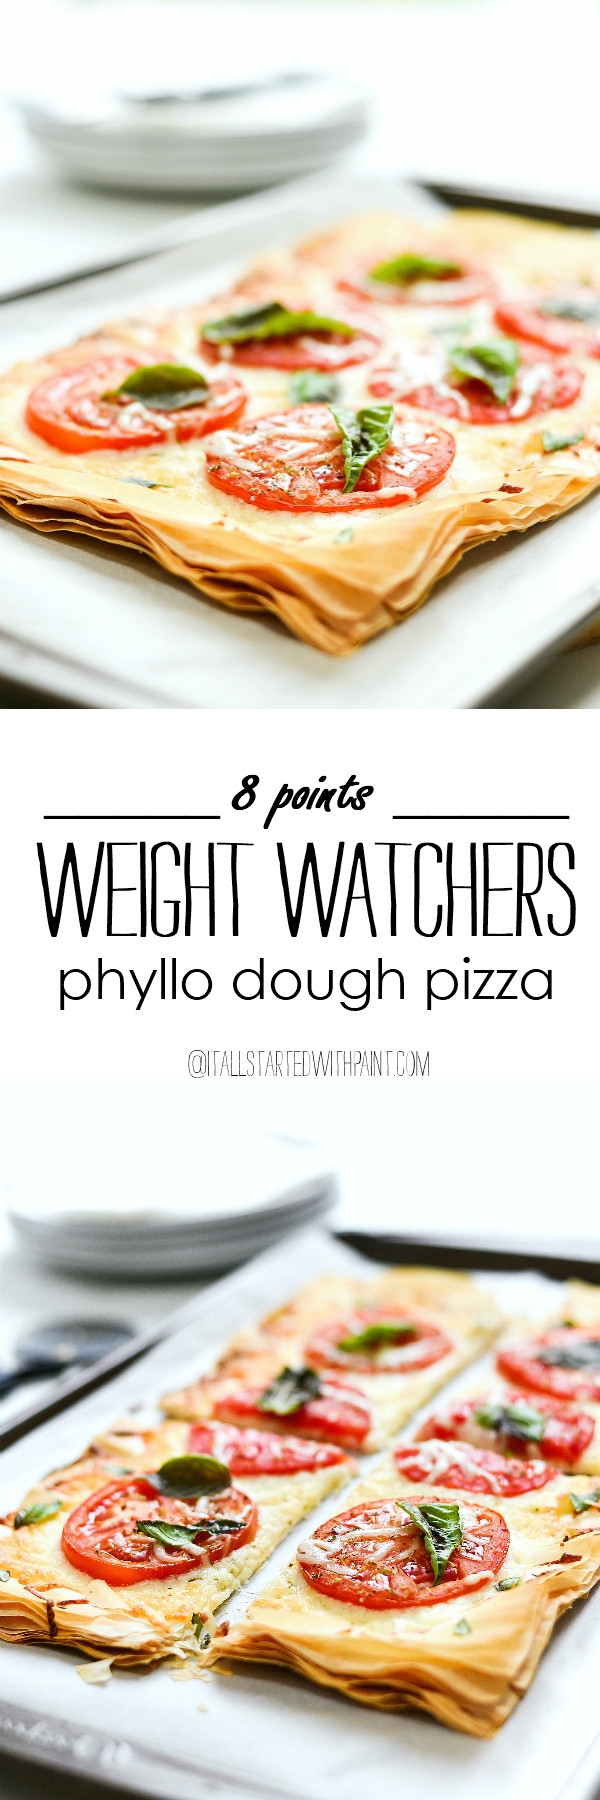 Pizza Dough Recipe By Weight
 Weight Watchers Pizza Recipe It All Started With Paint